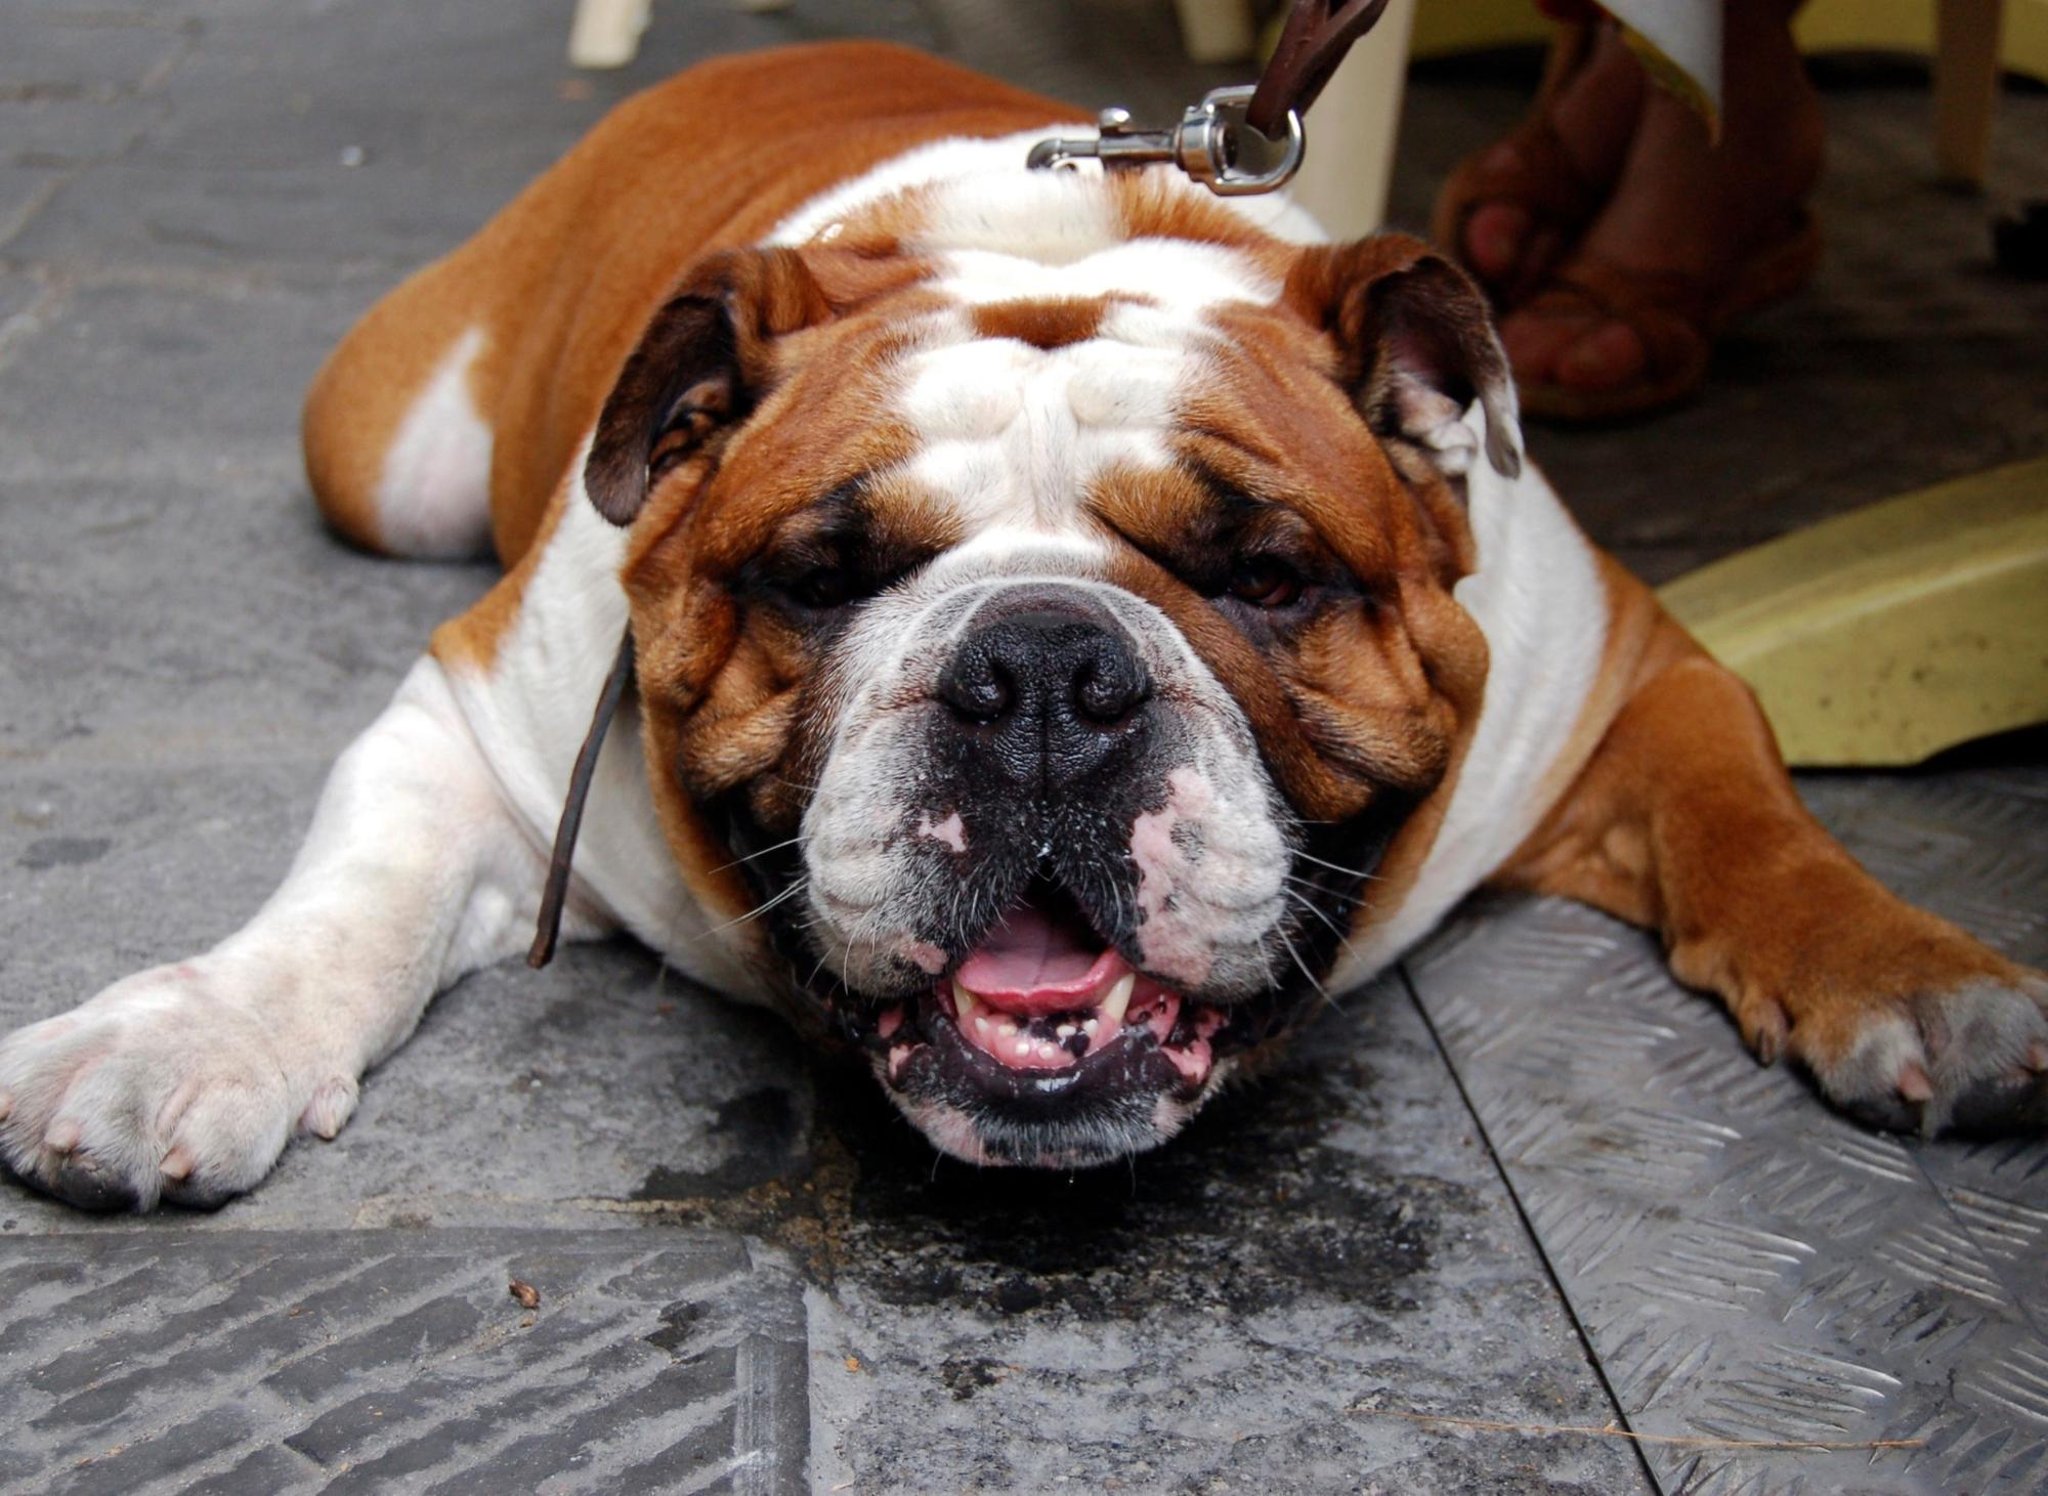 Here are the 10 breeds of adorable dog that drool the most – lovable but slobbery pups